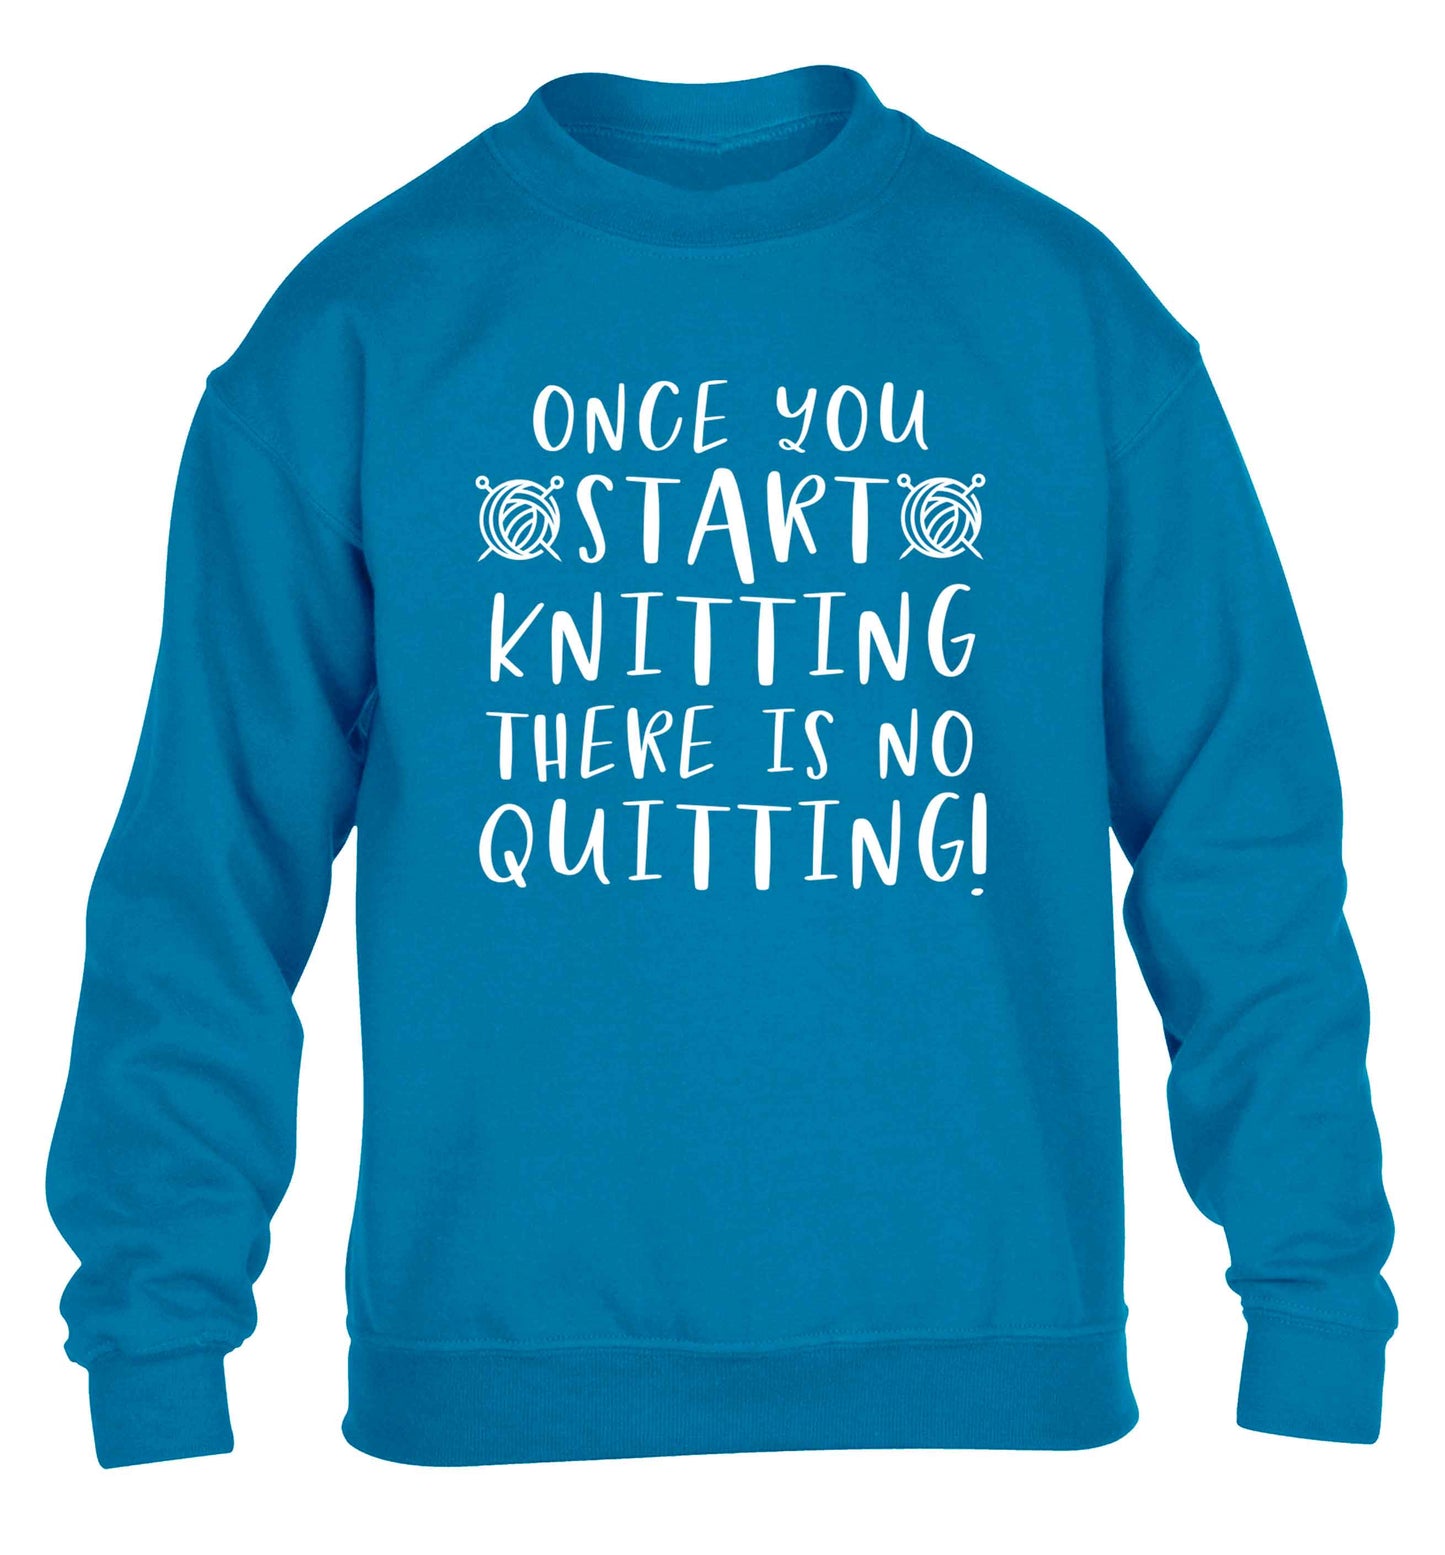 Once you start knitting there is no quitting! children's blue sweater 12-13 Years